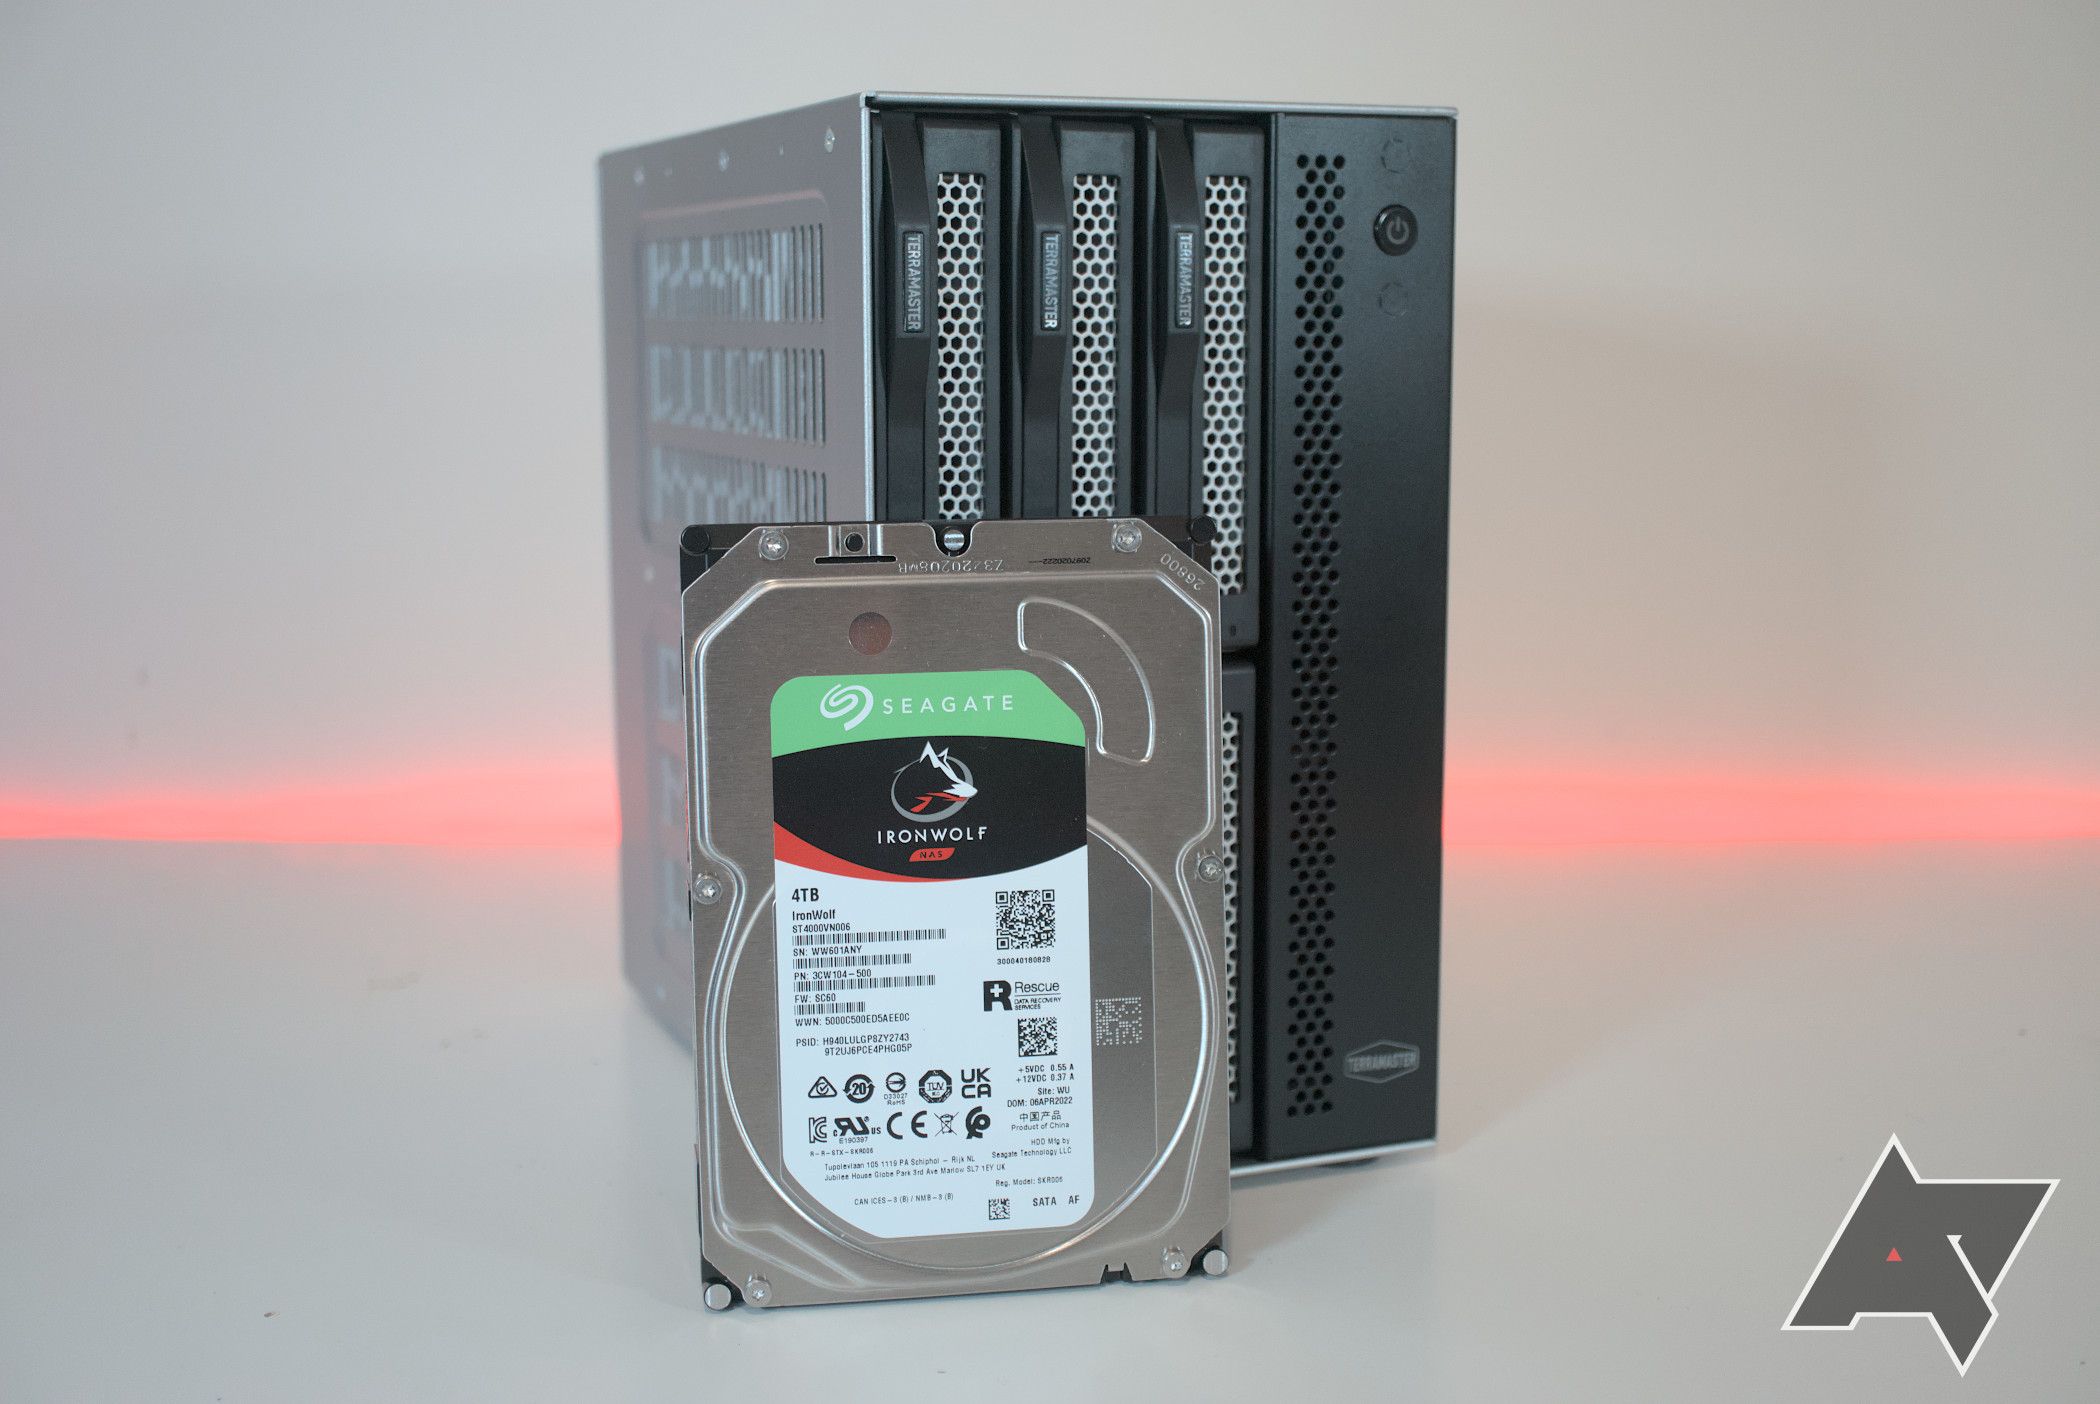 TerraMaster T6-423 with a Seagate NAS drive